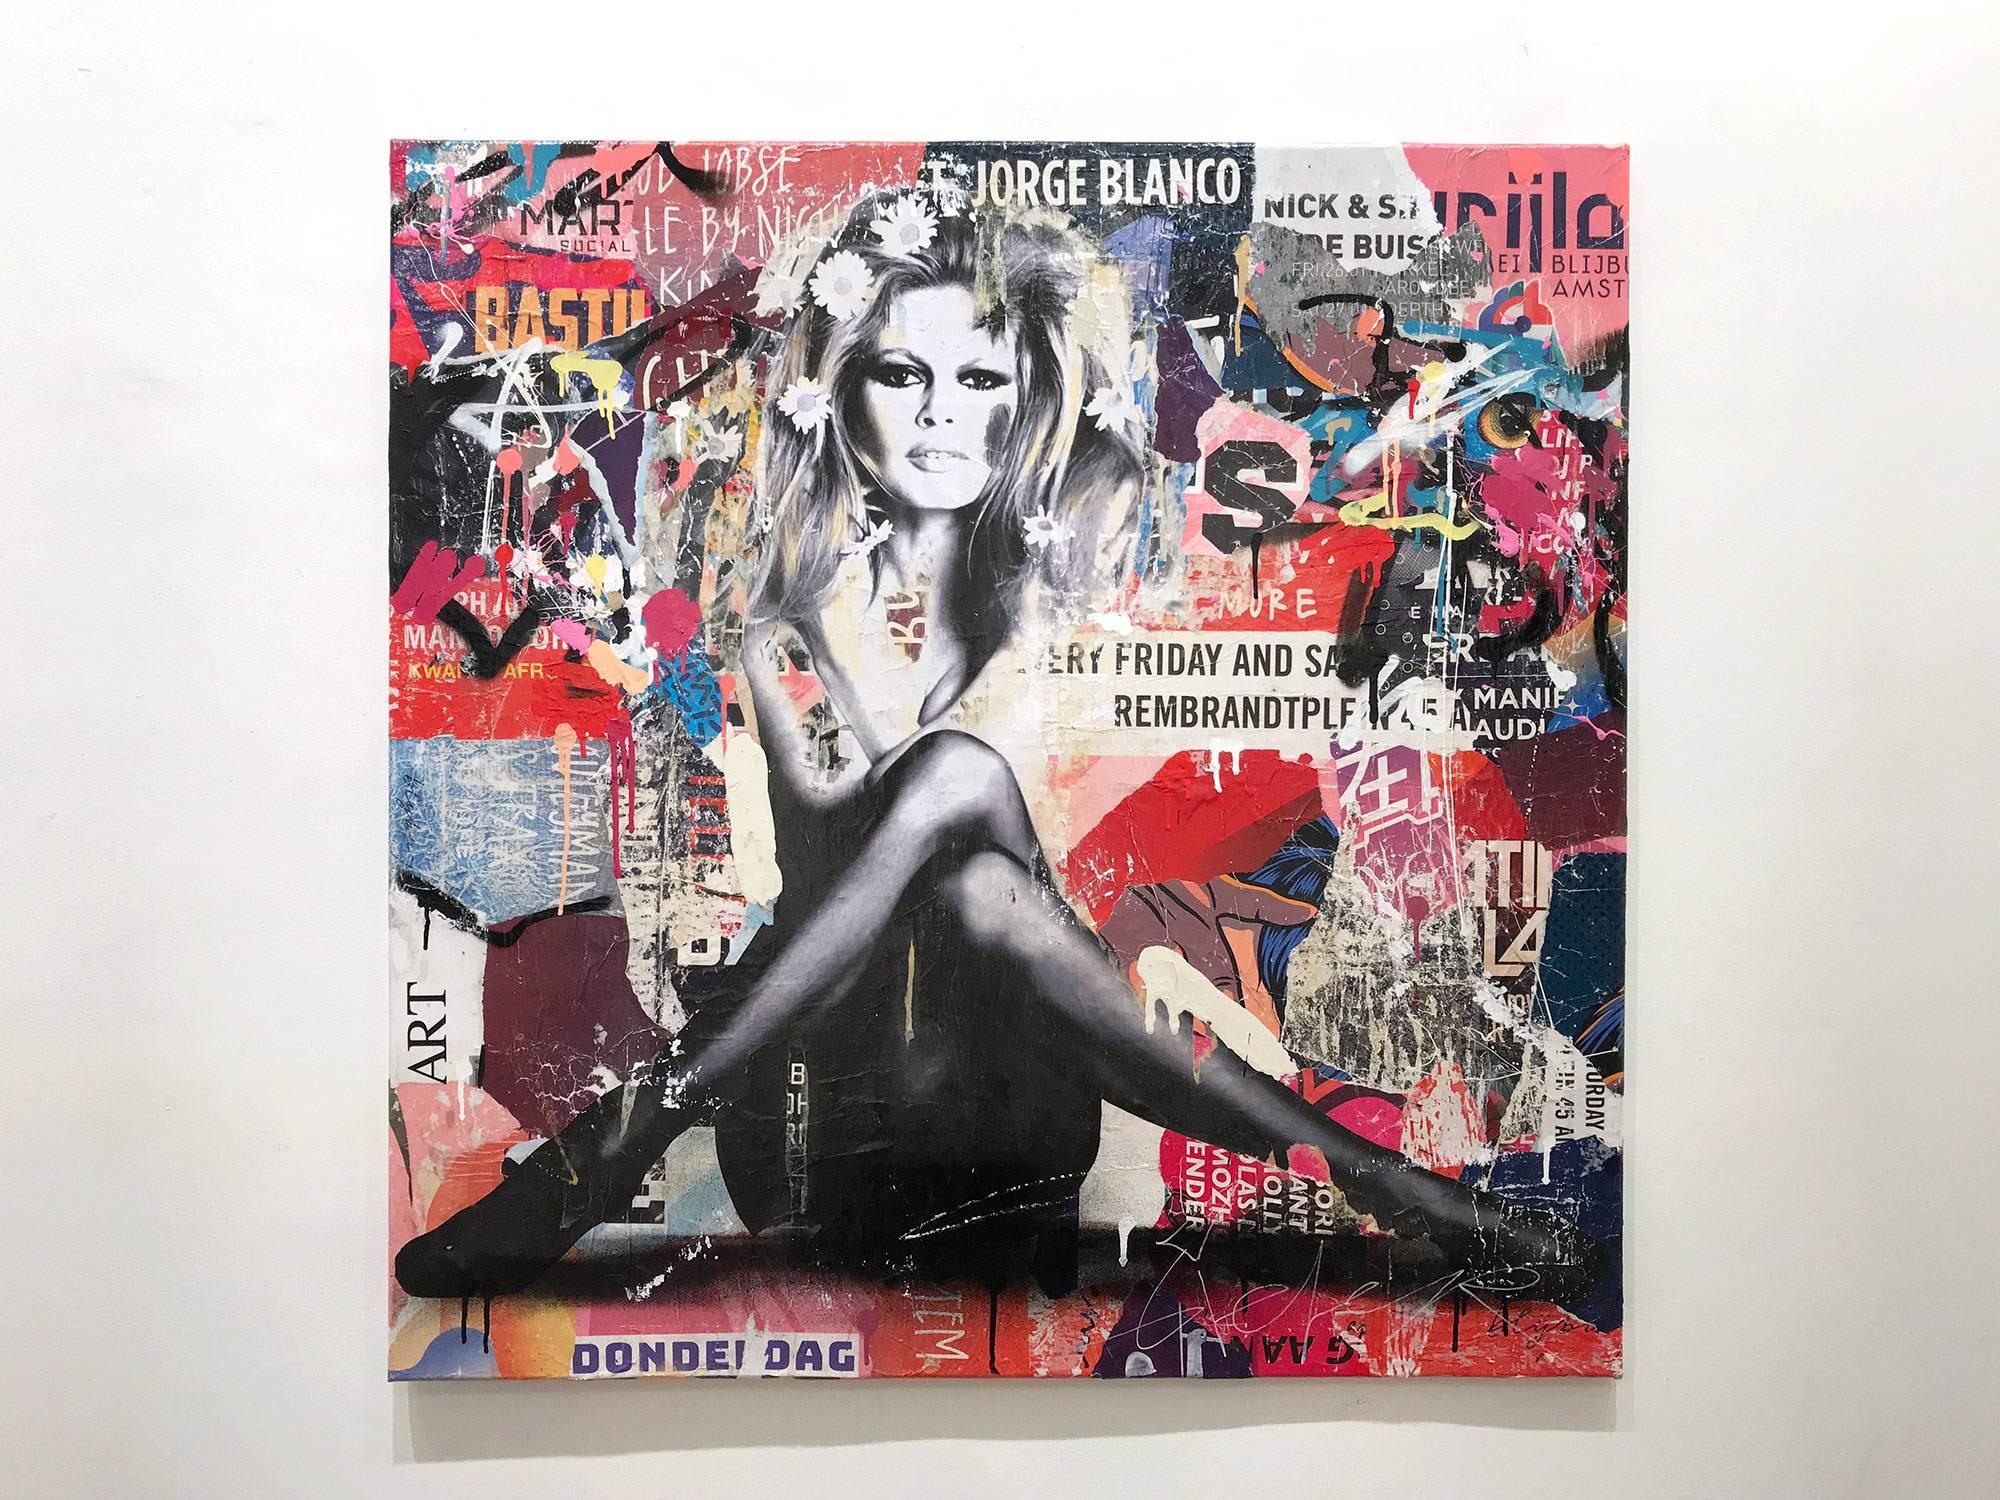 This piece depicts famous French actress and model Brigitte Bardot. Done with beautiful expressive colors and a distinctive street art design, this piece pops with energy and a romantic beauty. Its composition and bold Décollage makes a wonderful